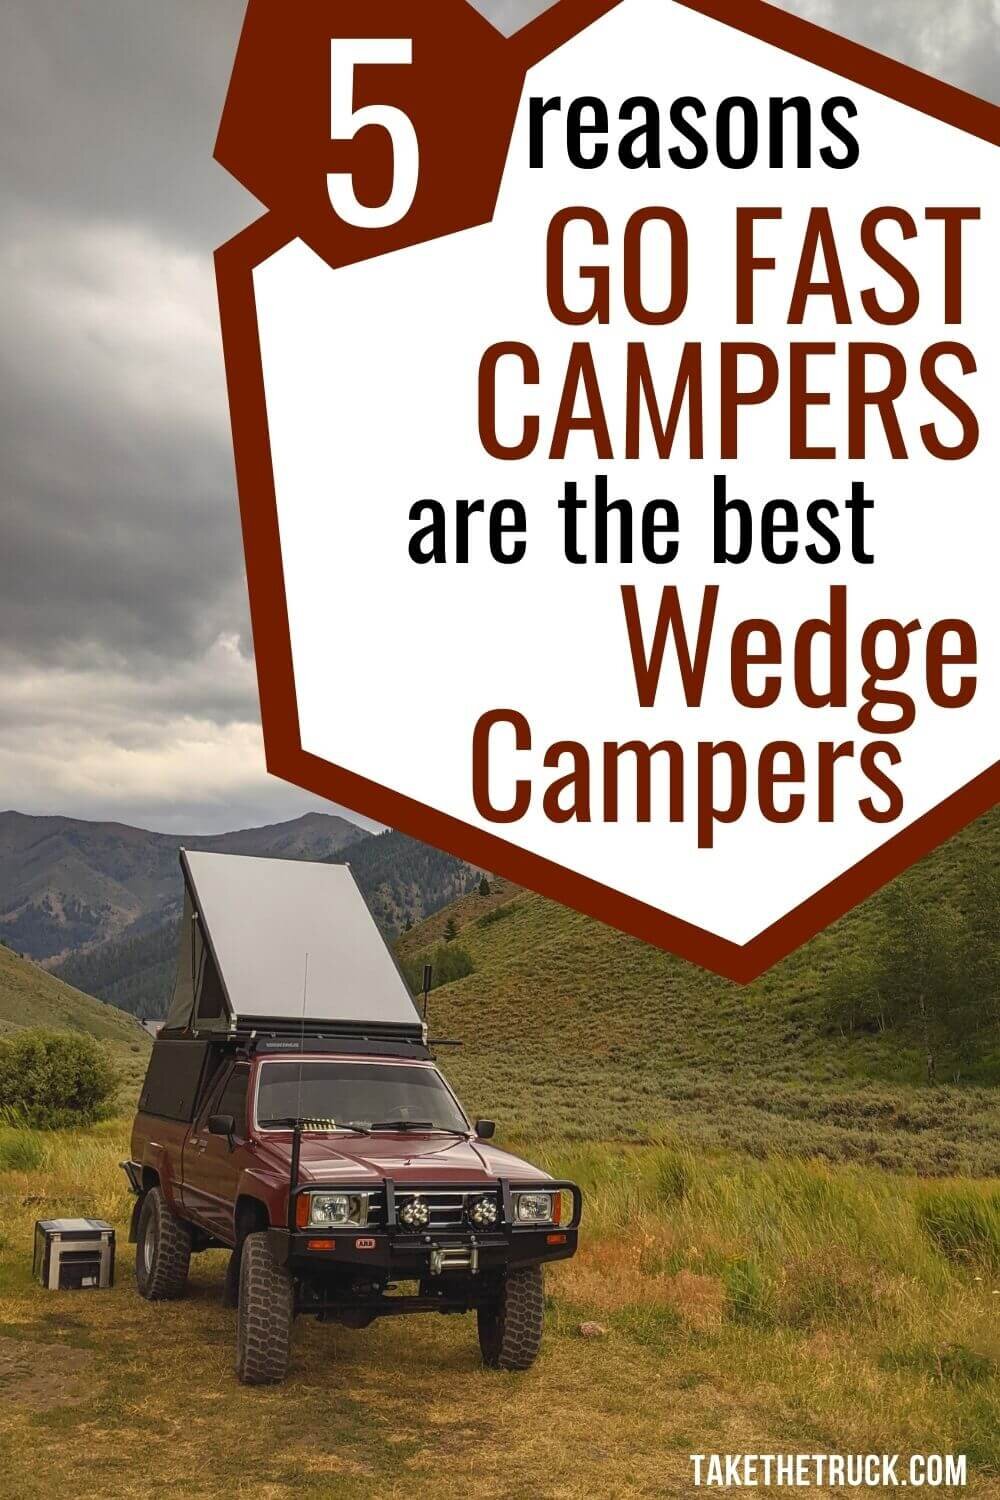 5 reasons Go Fast Campers are the best company to go with when upgrading to a wedge camper for truck camping.